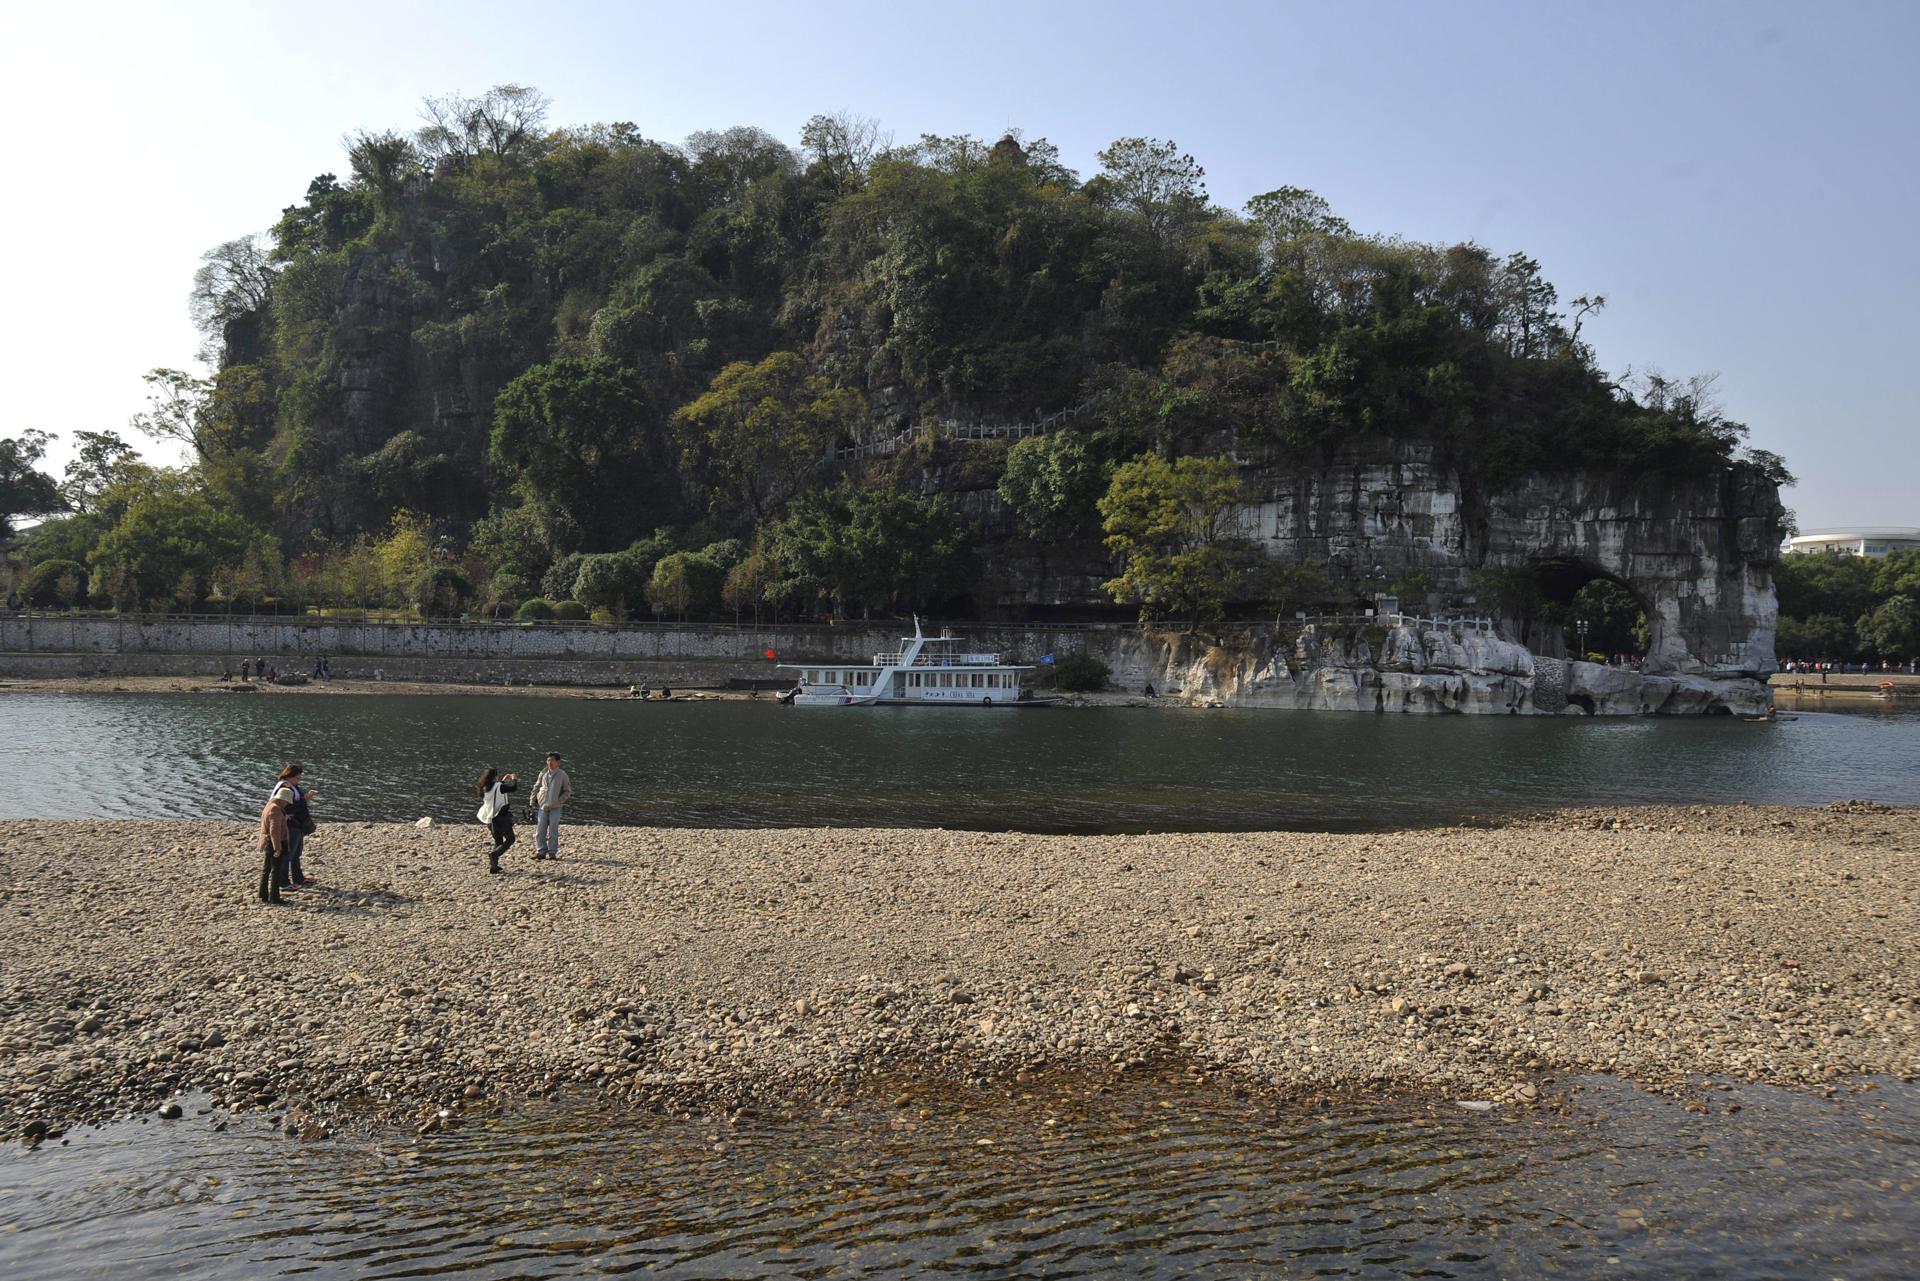 Tourists take photos on the banks of the Li River, in Guilin, in southern China's Guangxi Zhuang Autonomous Region on 13 November, 2009. EFE-EPA FILE/Wu Hong